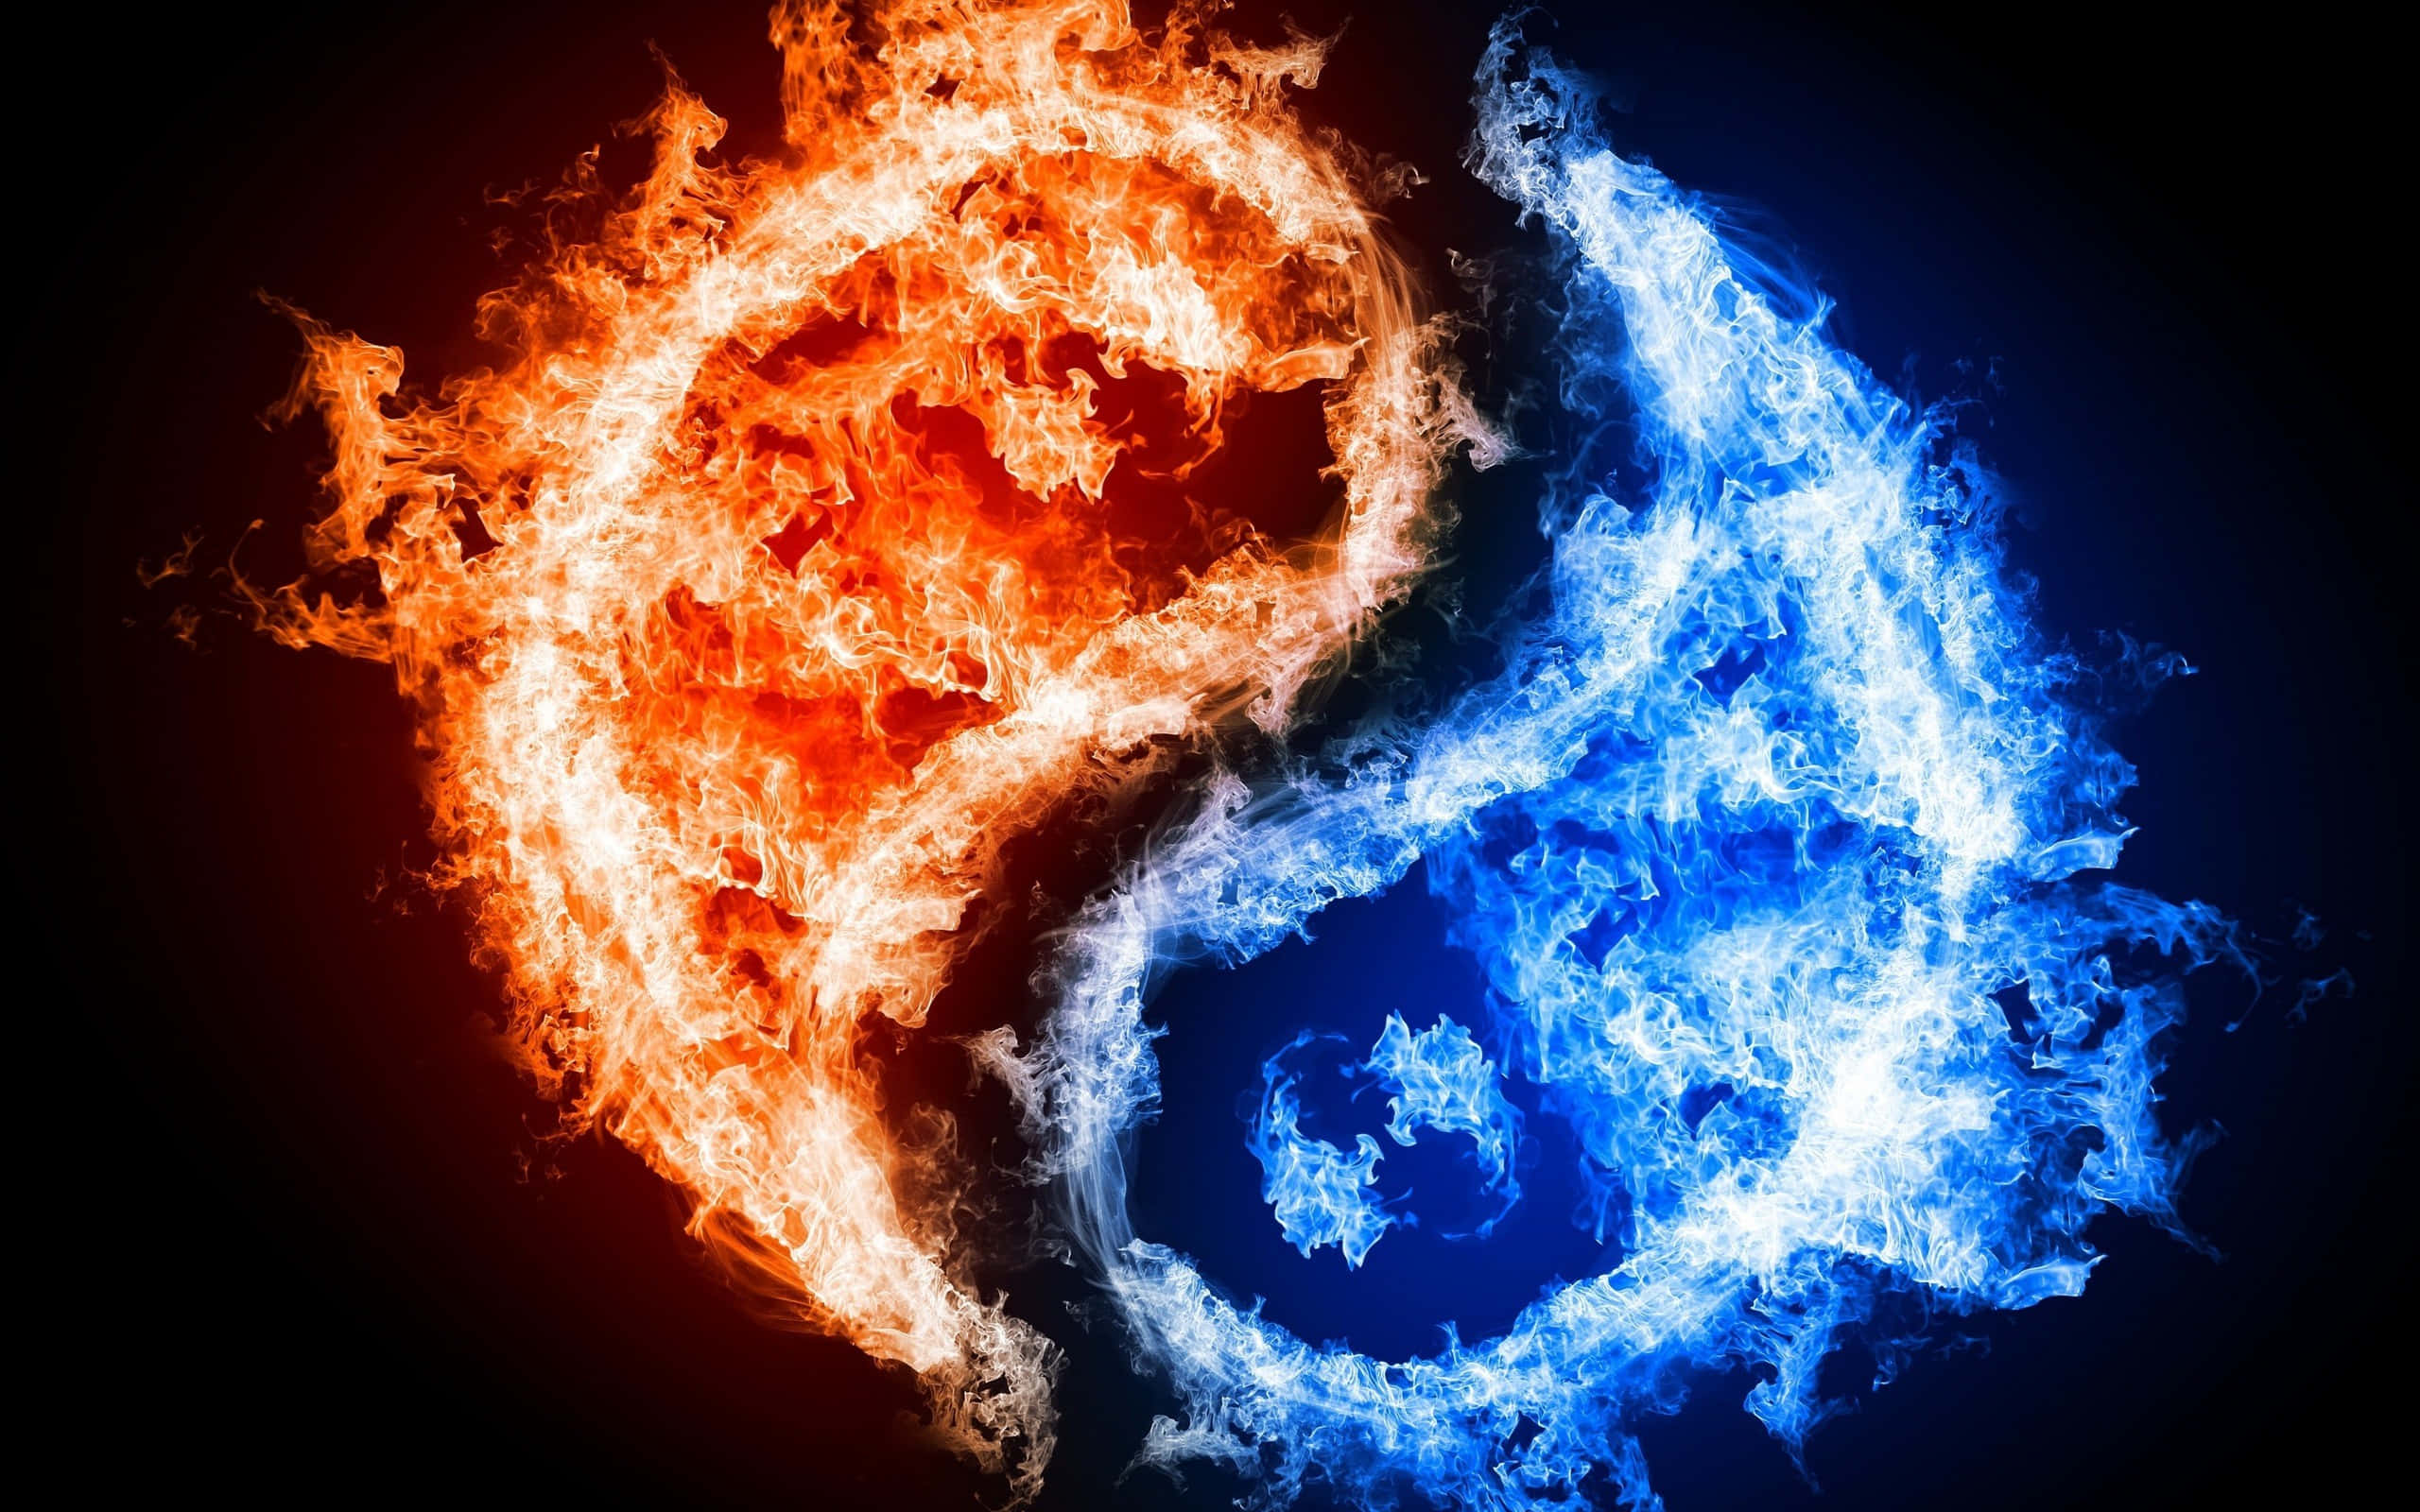 "Captivating Red and Blue Fire" Wallpaper